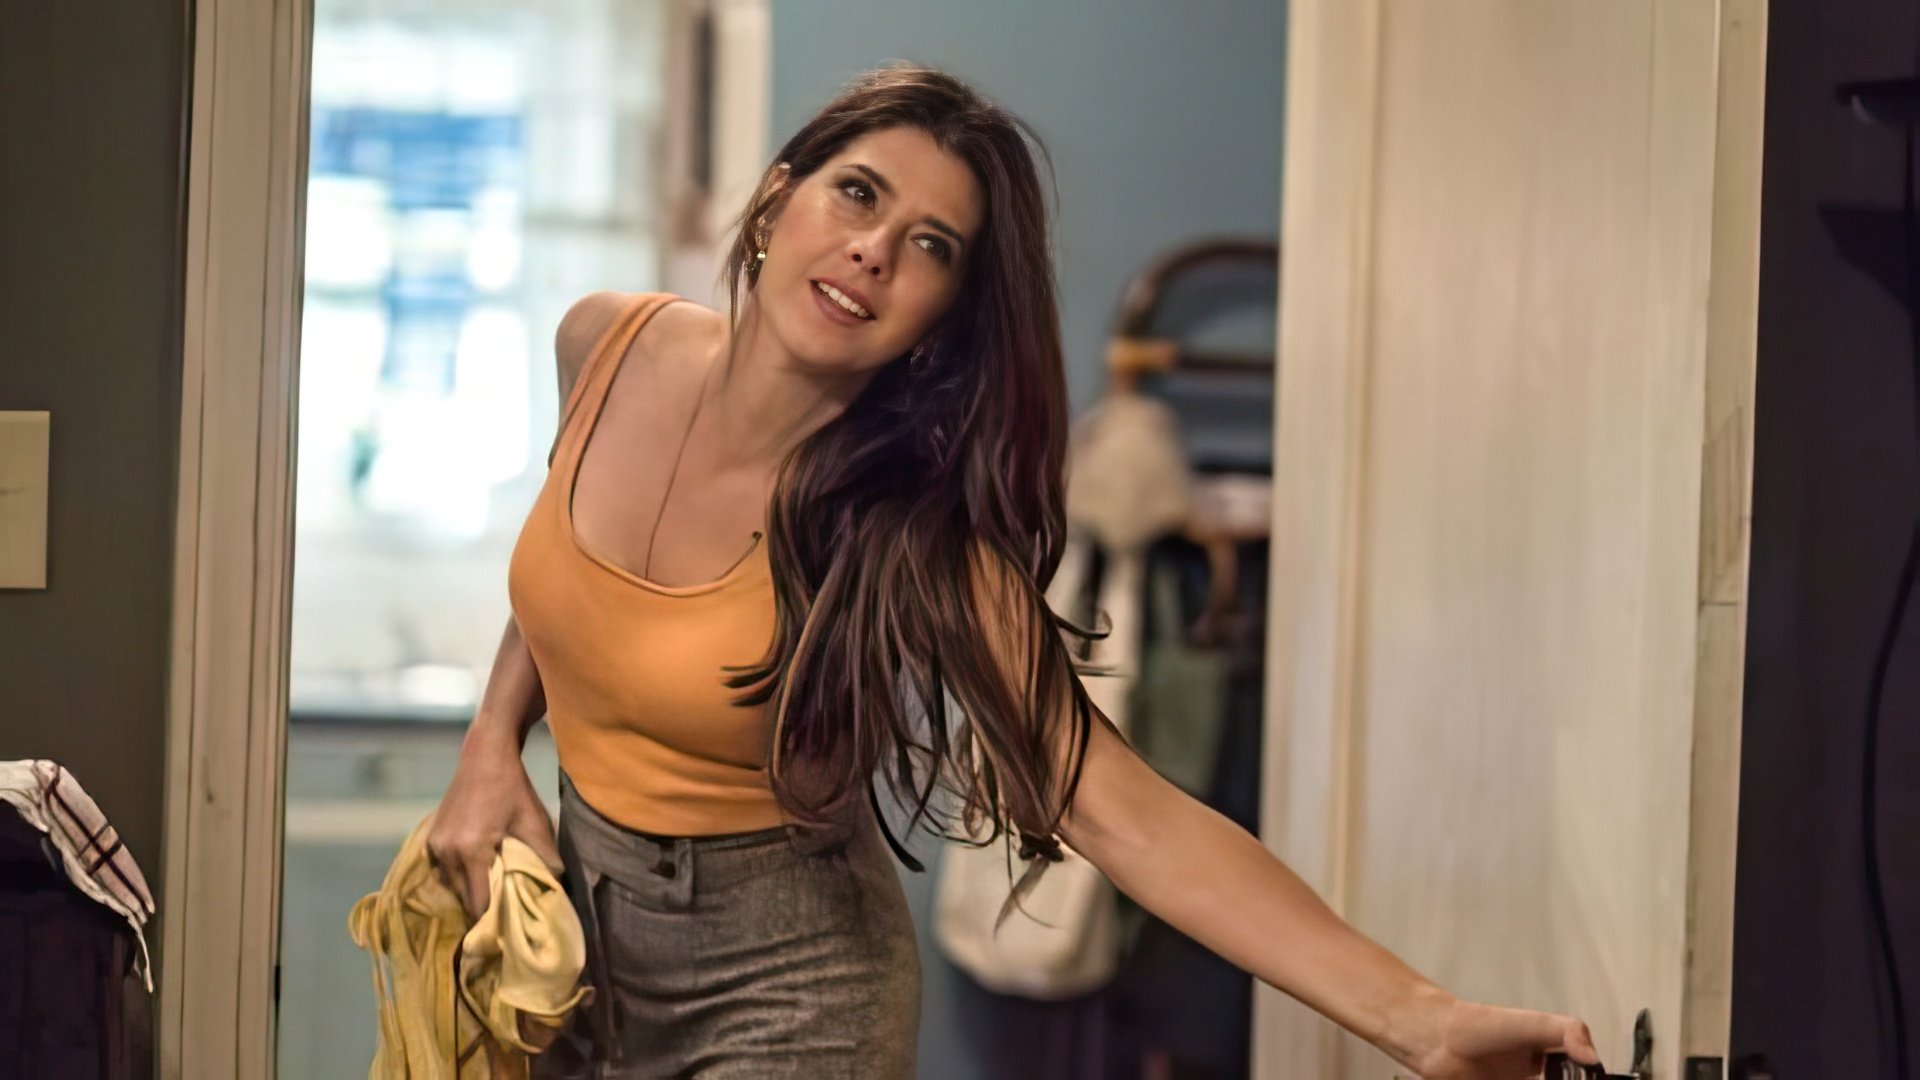 Spider-Man: Homecoming: Marisa Tomei as Aunt May